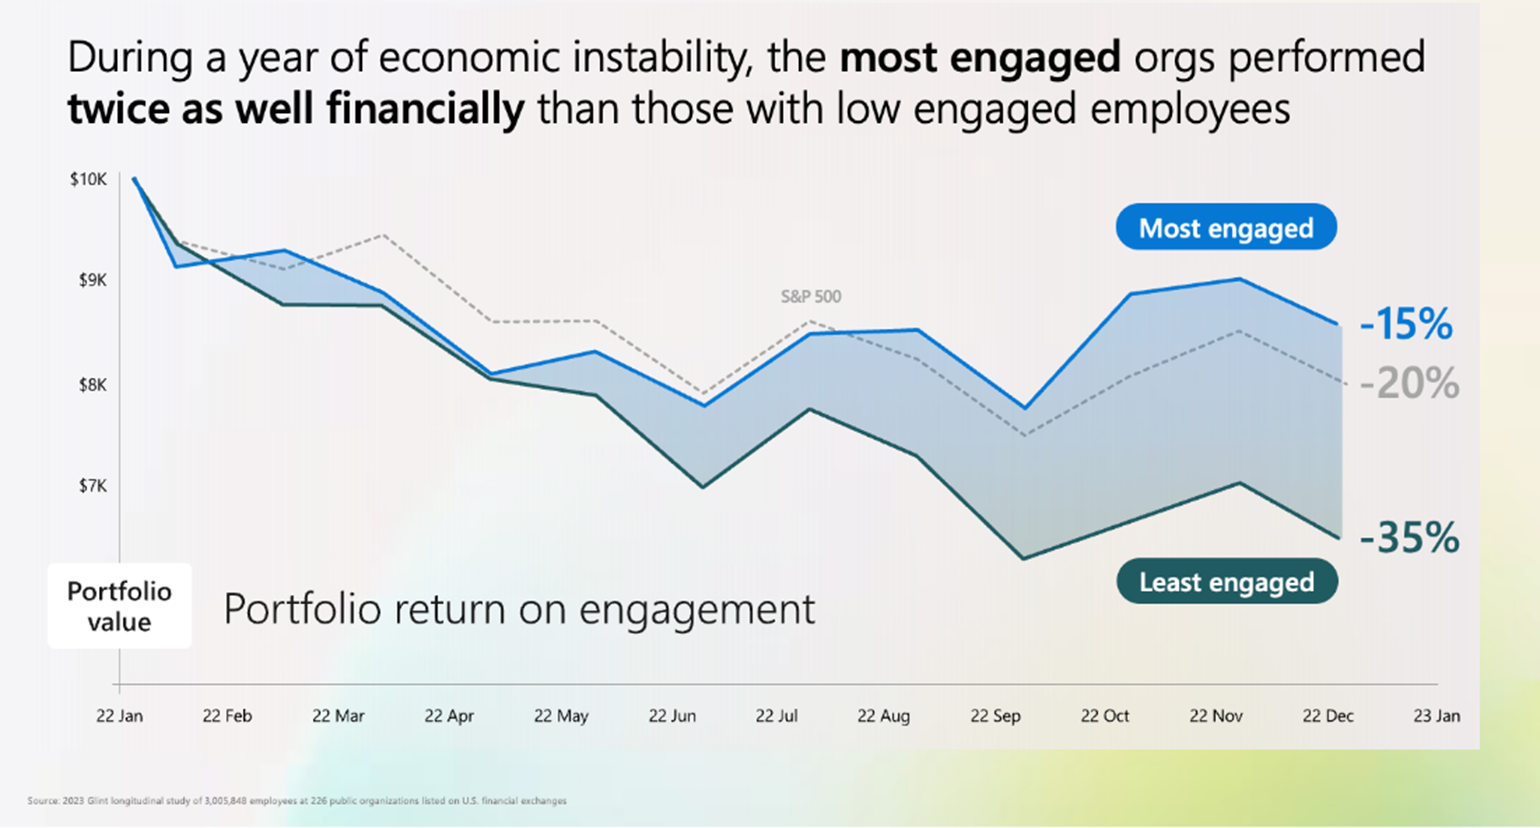 An illustration of a graph explaining how most engaged organizations perform better financially.